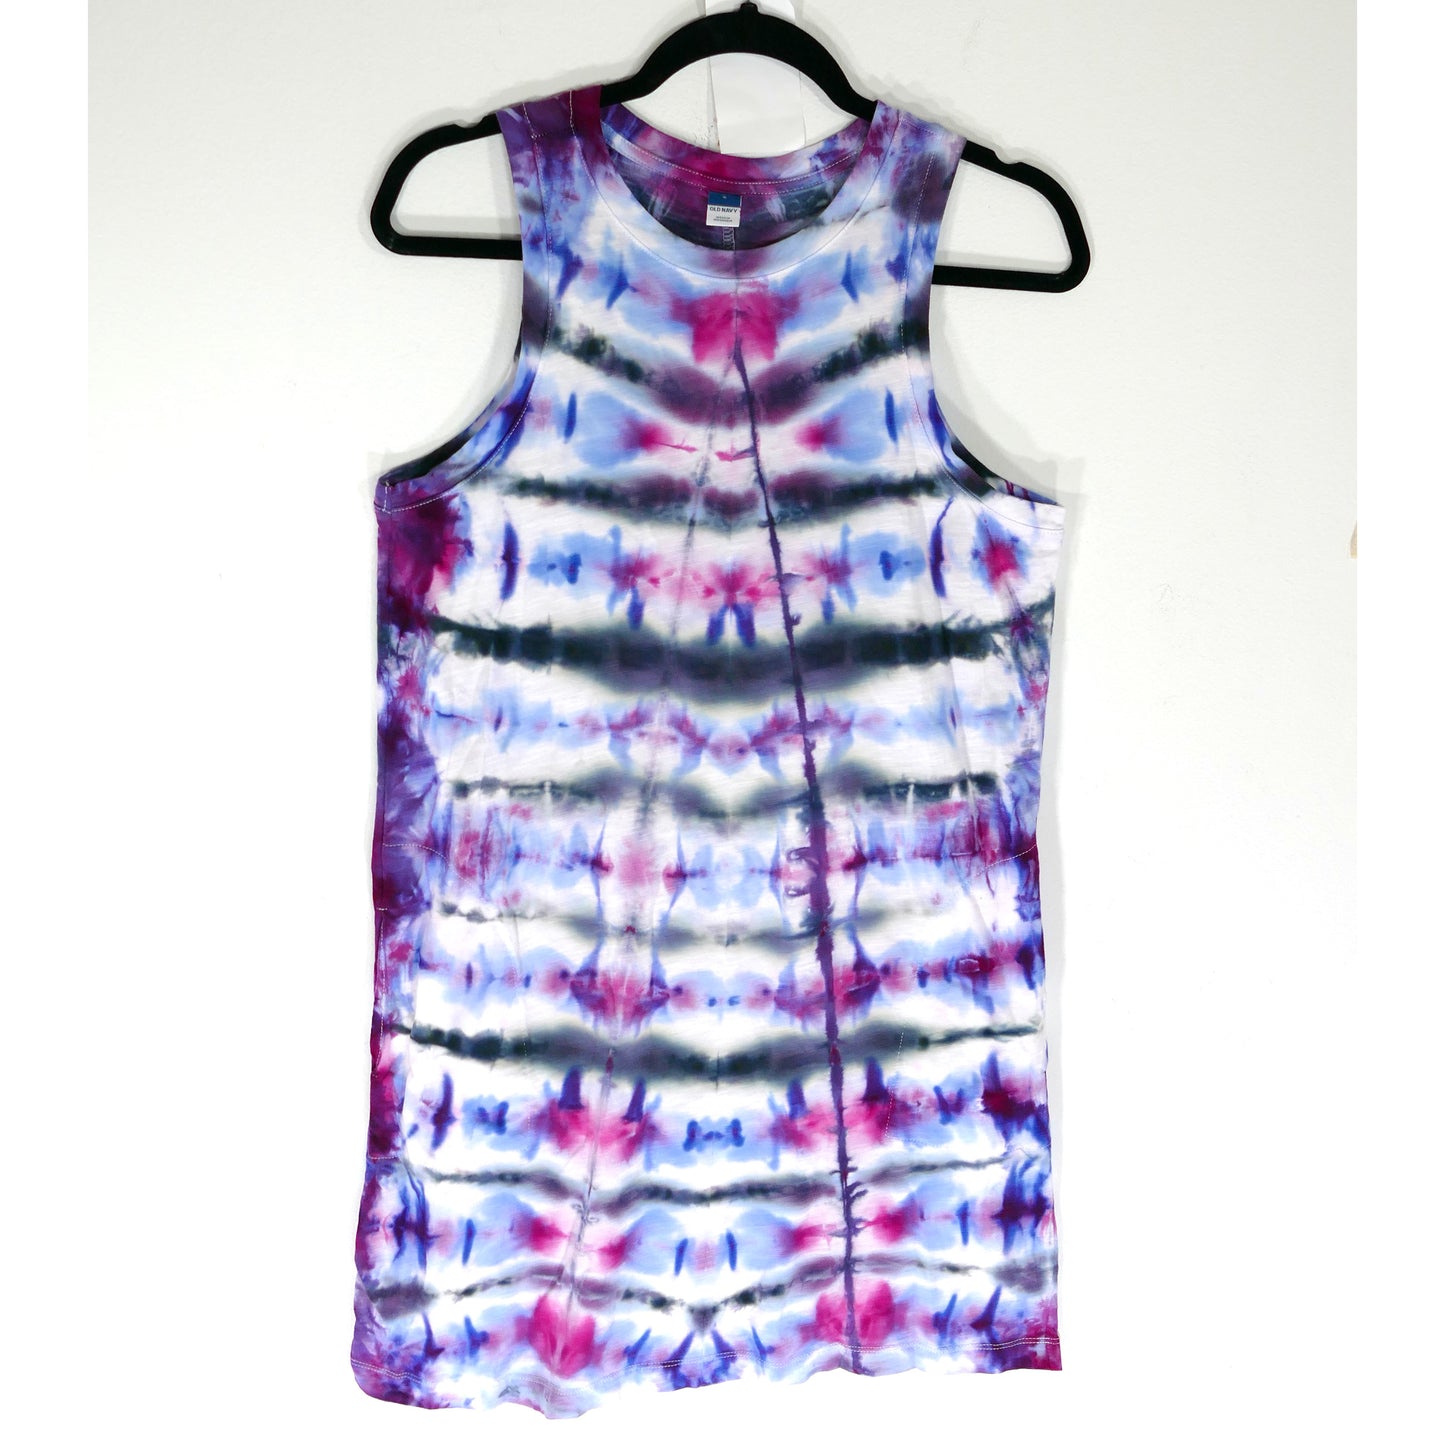 SMALL TIE-DYED OLD NAVY DRESS LIGHT